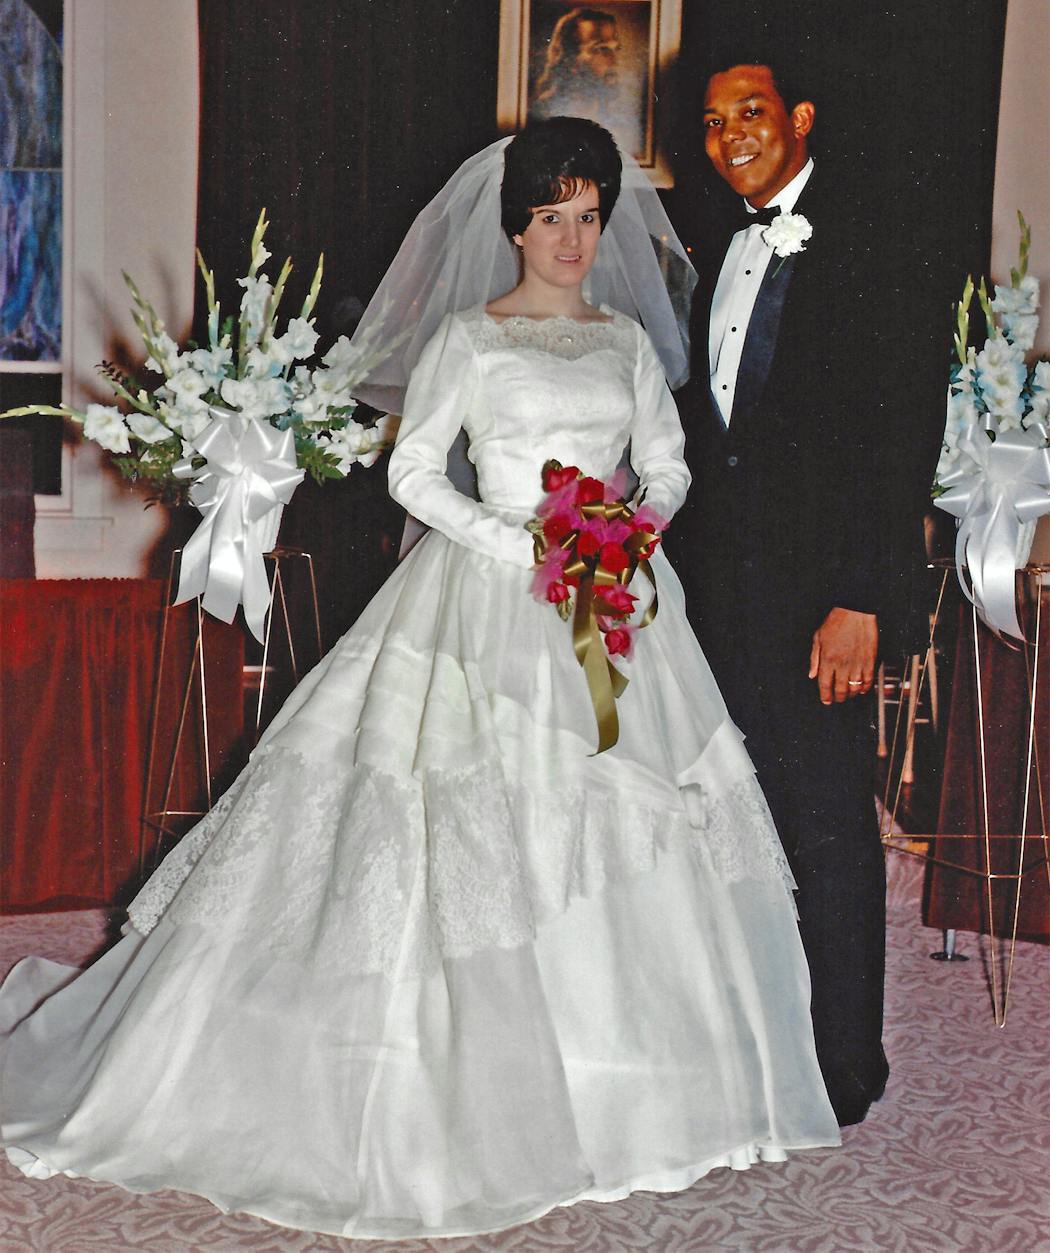 Tony and Gordette Oliva's wedding photo captures a young Cuban-born major leaguer on the day he exchanged vows in his bride's hometown of Hitchcock, S.D., where the ever-popular and outgoing former Twin Oliva said he became a “king.“ 